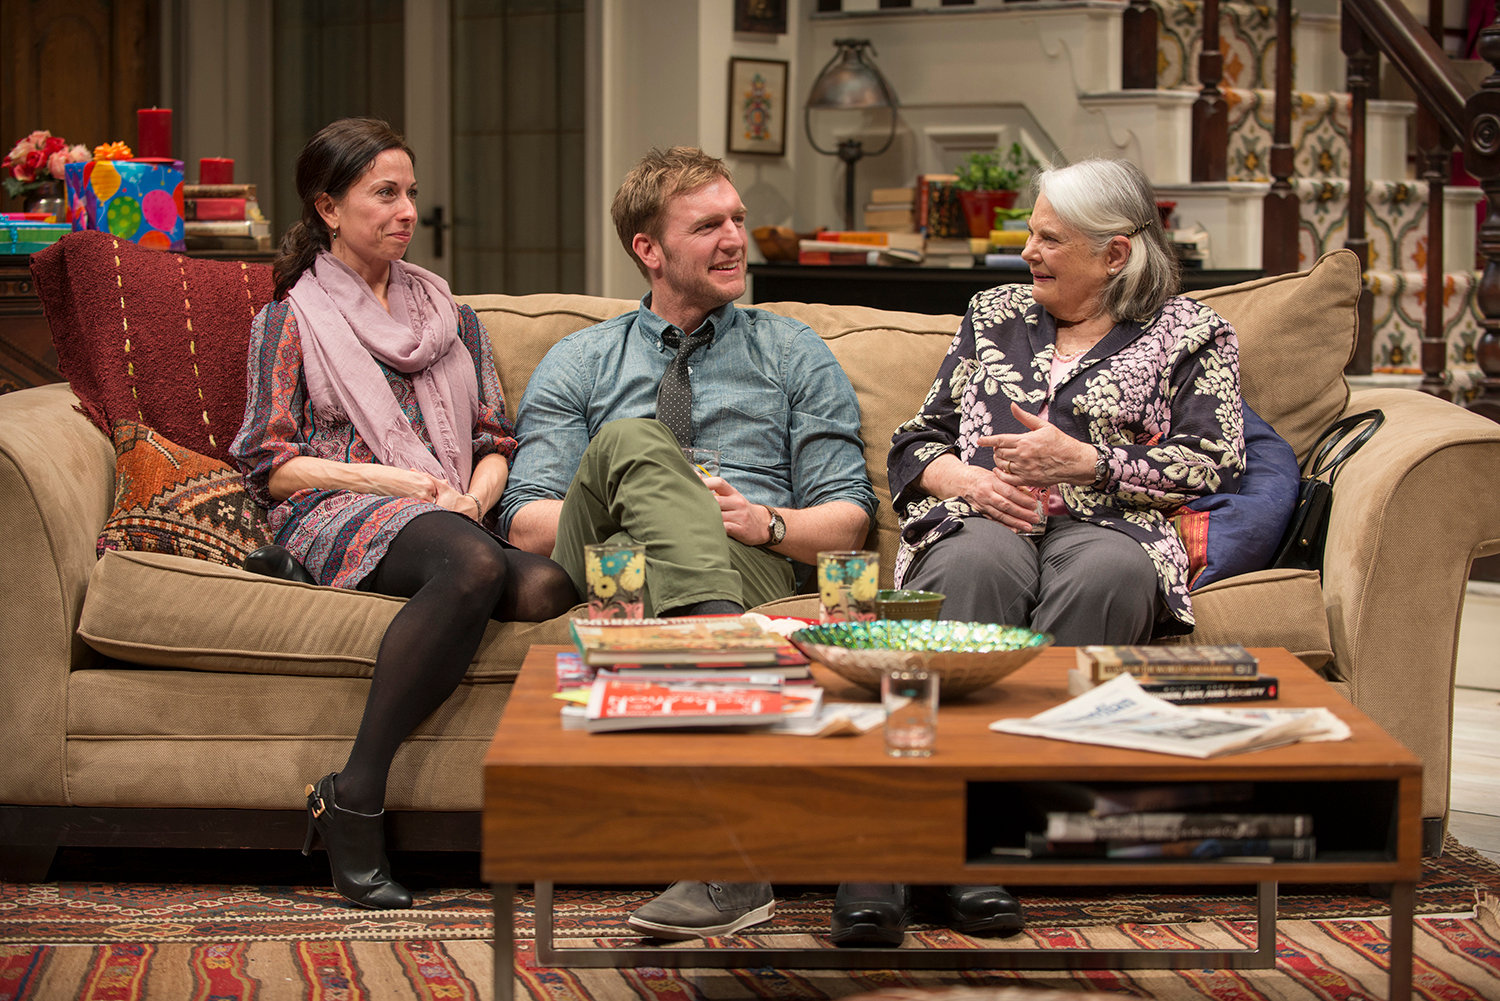 The Herd by Rory Kinnear at Steppenwolf Theatre.